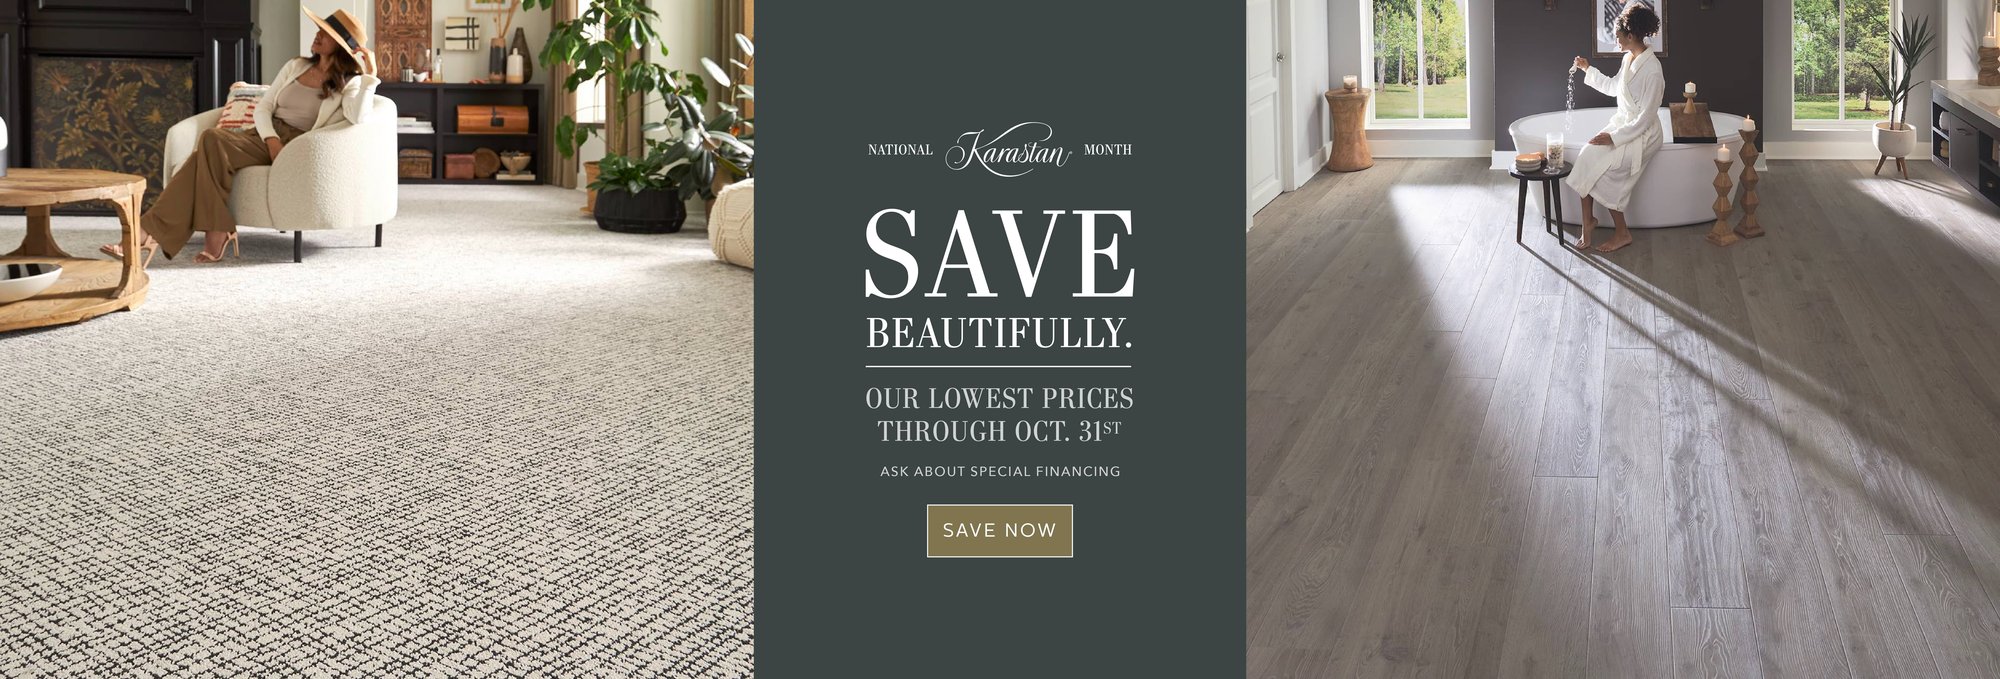 Carpet and hardwood with promotion banner